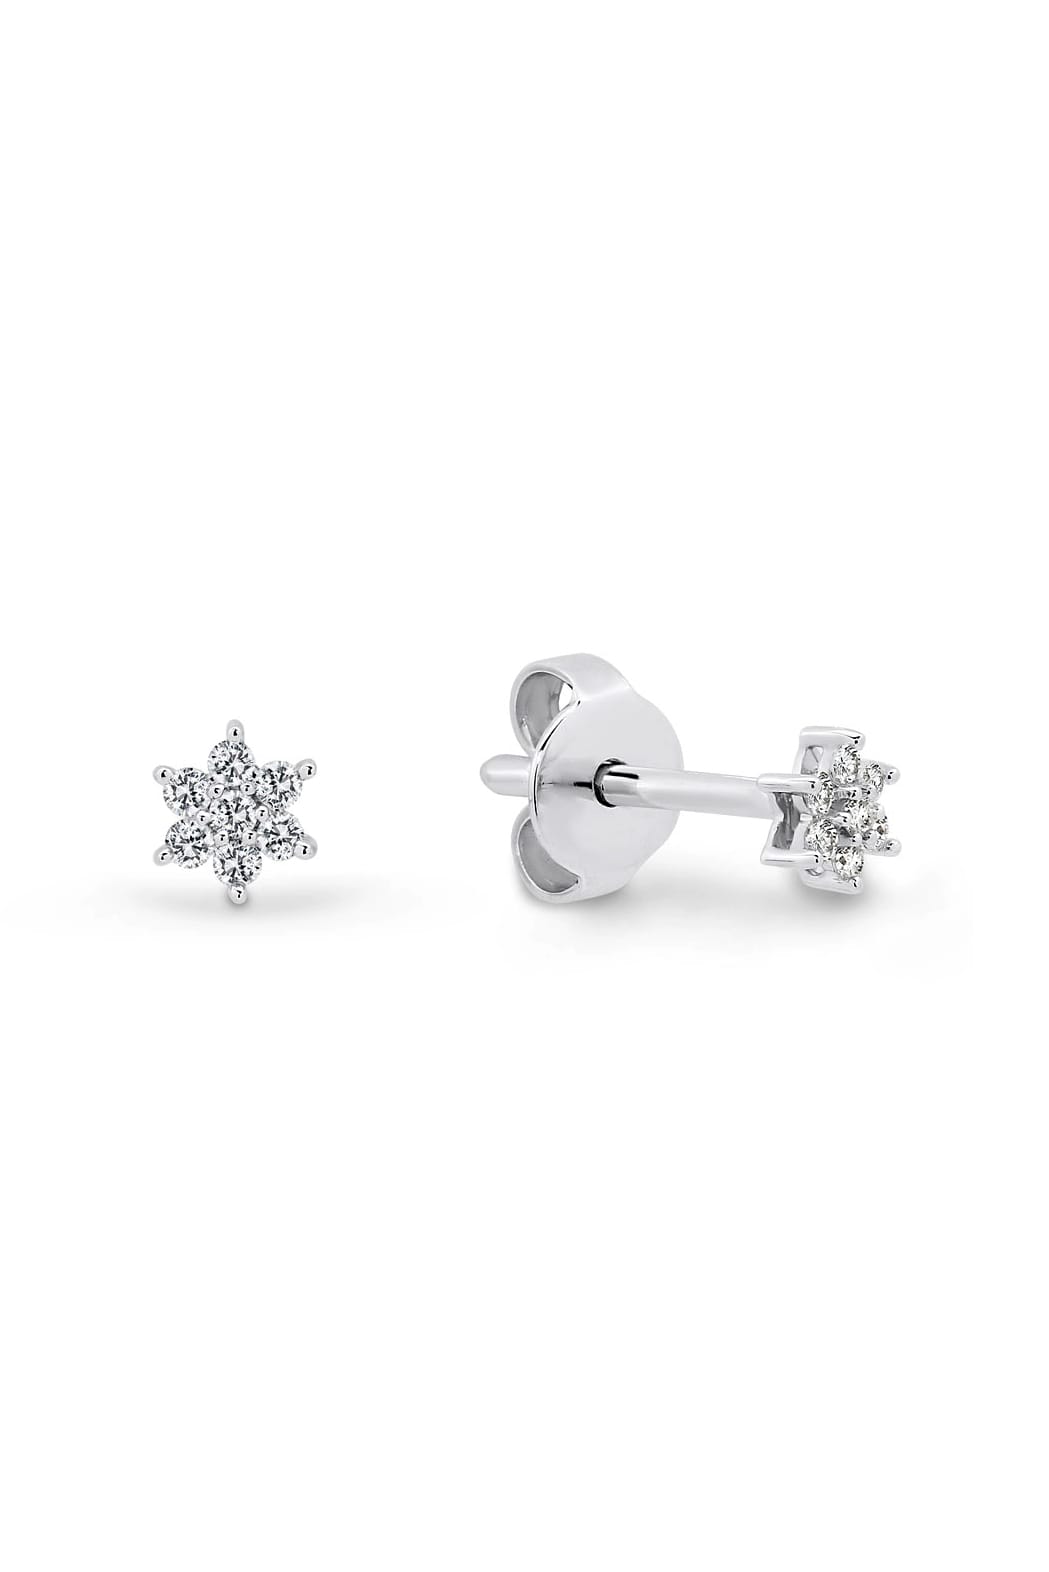 0.11ct Diamond Cluster Stud Earrings set in 9ct White Gold from LeGassick